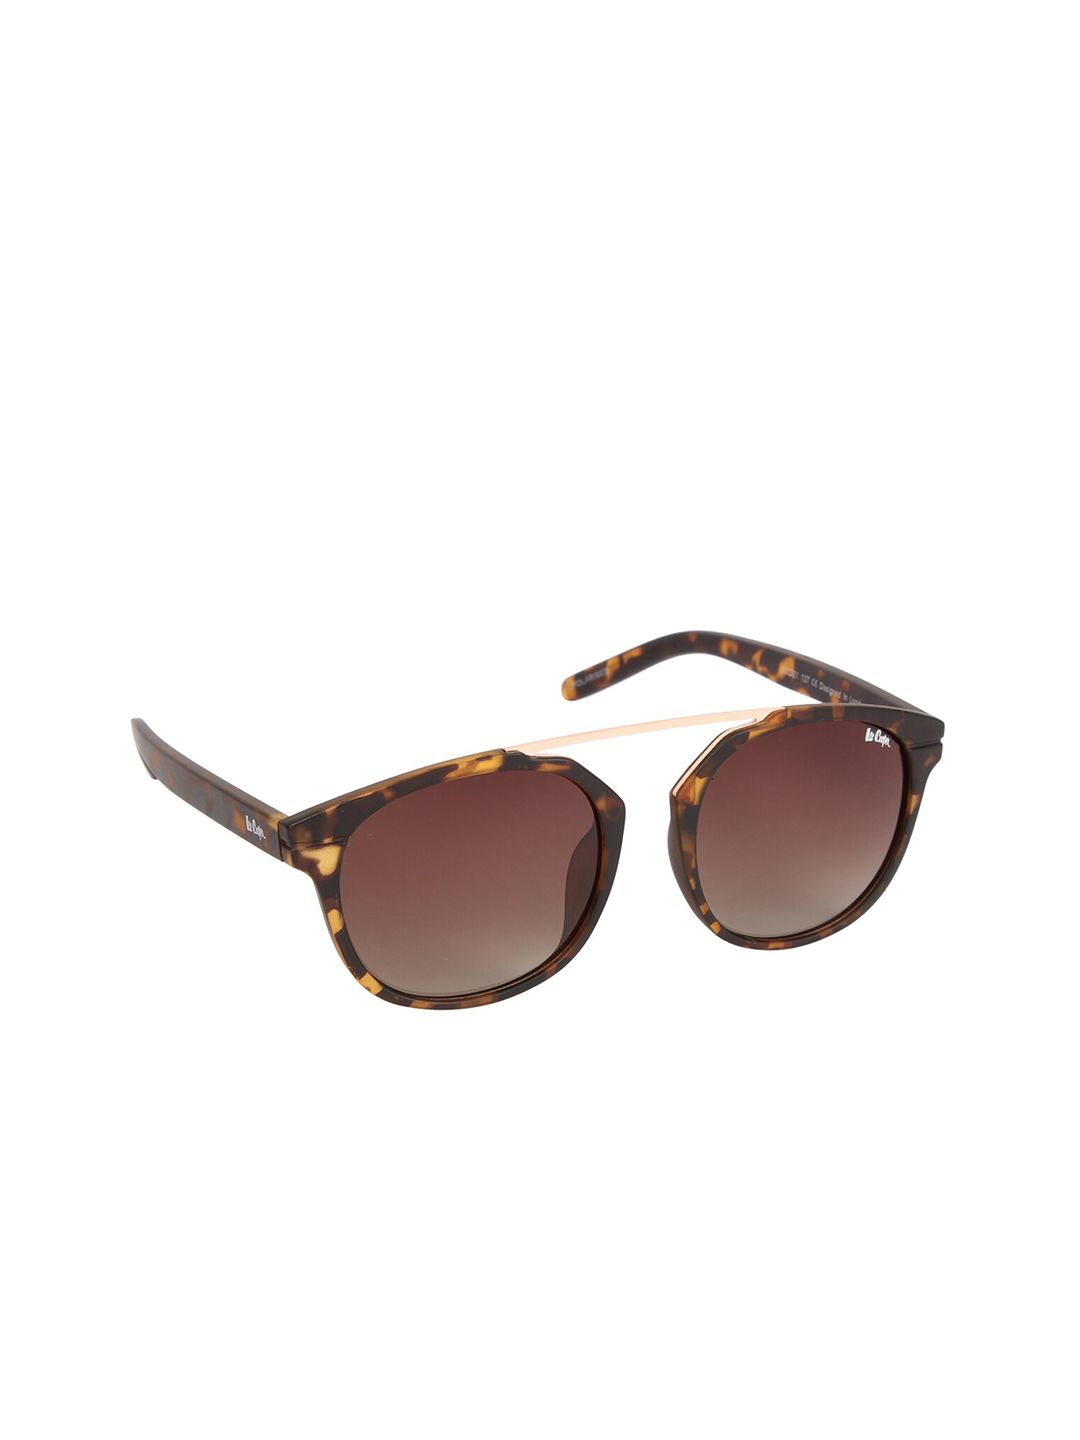 Lee Cooper Unisex Brown Lens & Brown Round Sunglasses with Polarised Lens LC9162NTBPOL Price in India